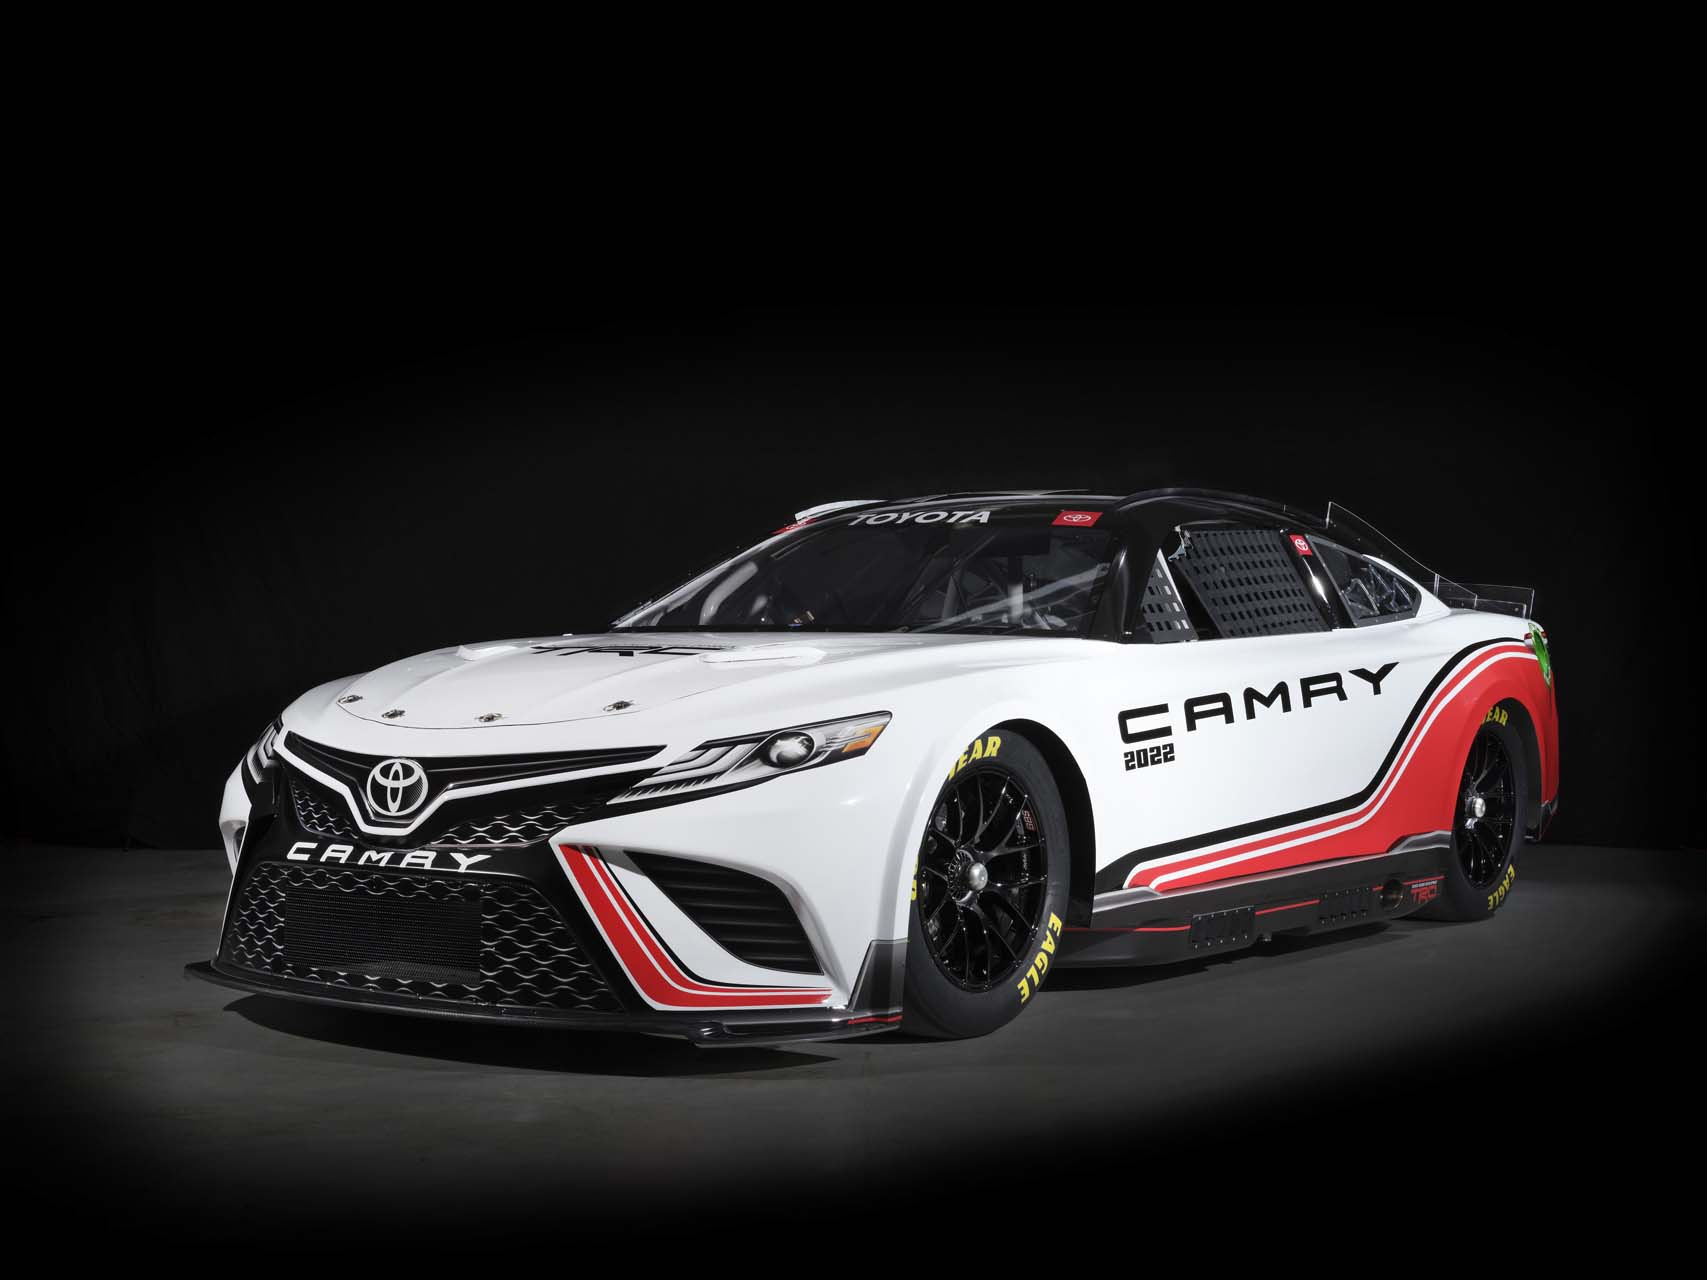 NASCAR Subsequent Gen race automobile debuts, brings the game into the